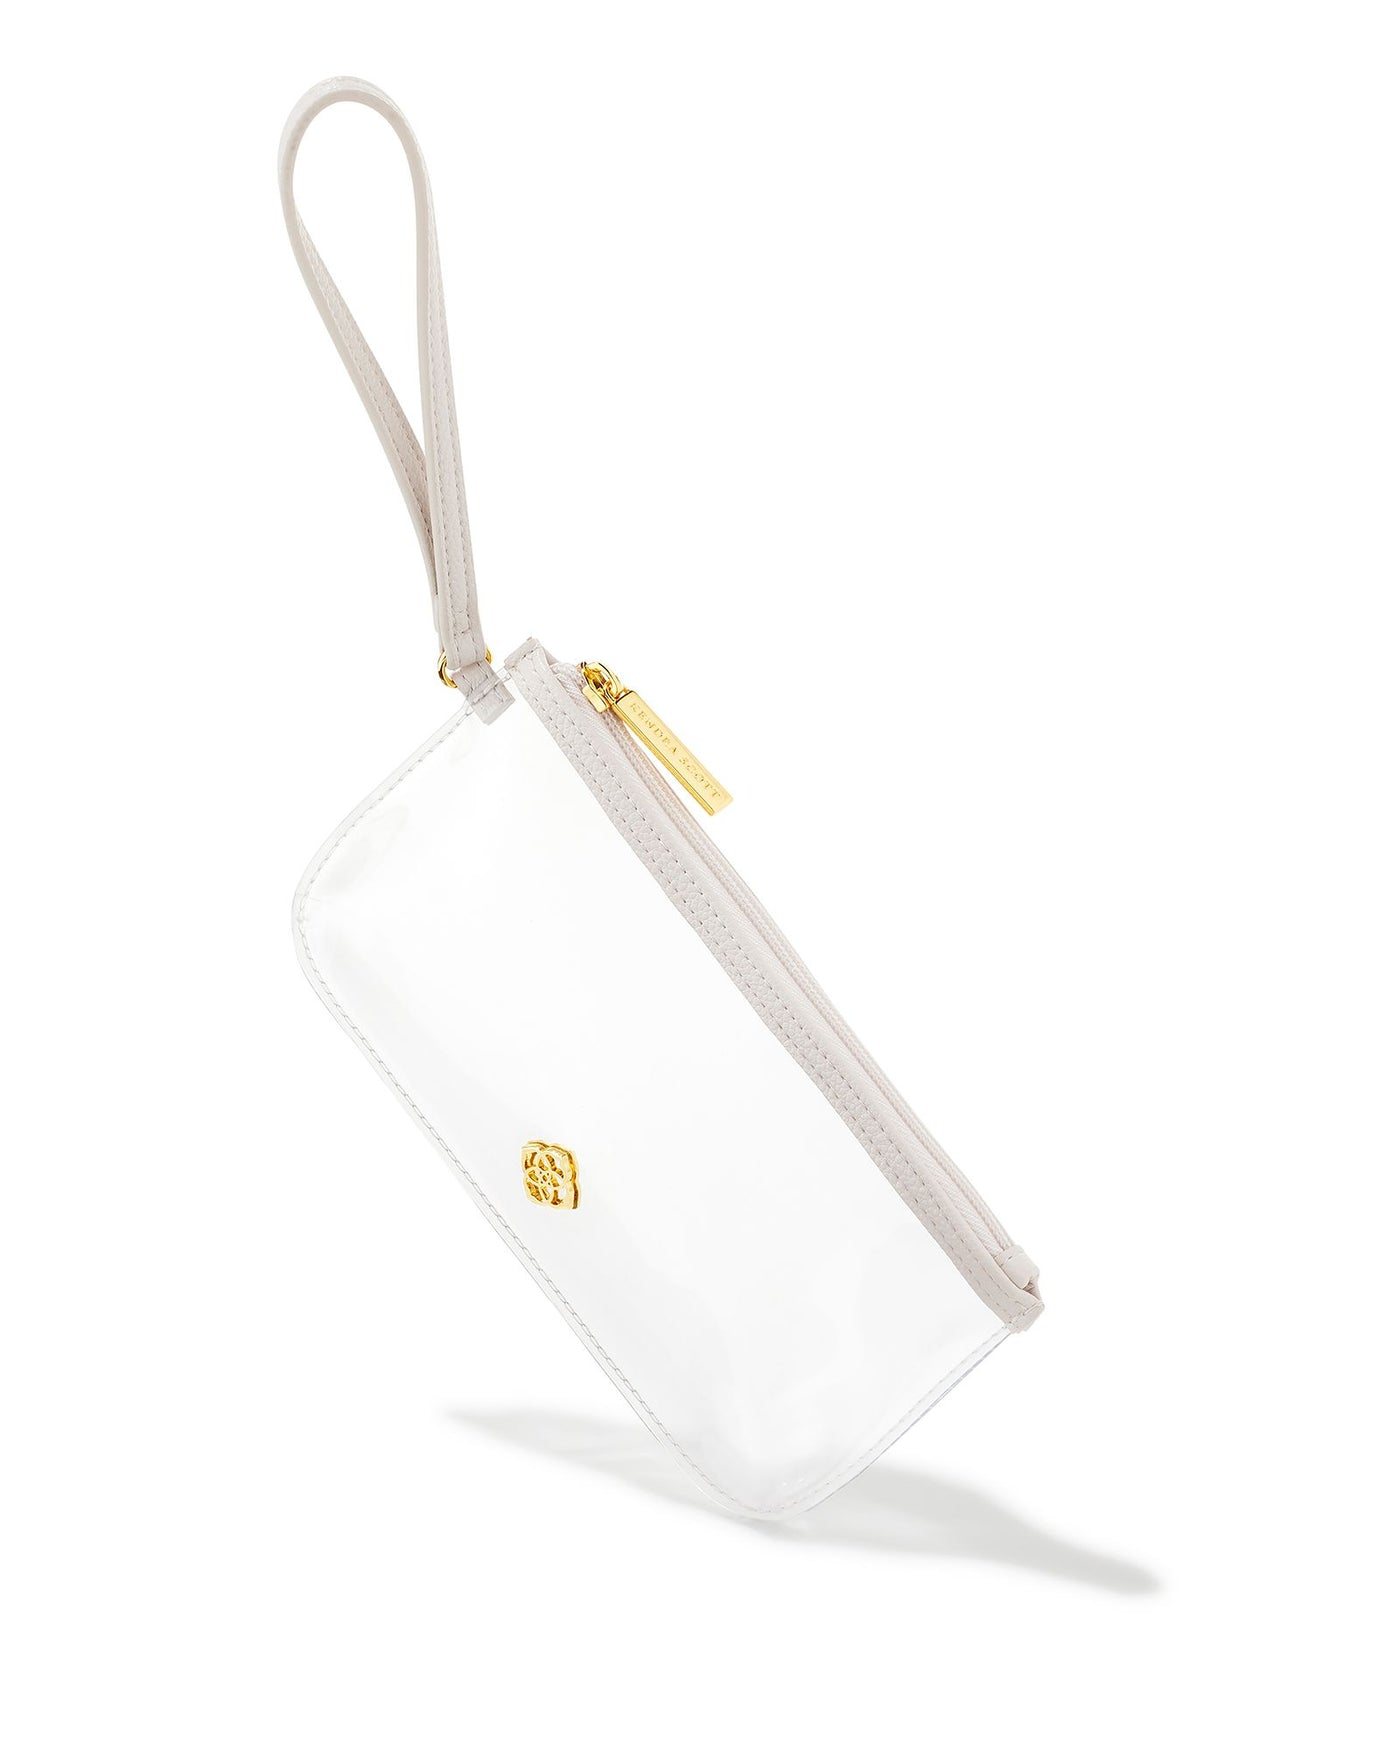 Kendra Scott Clear Wristlet-Handbags-Kendra Scott-Market Street Nest, Fashionable Clothing, Shoes and Home Décor Located in Mabank, TX